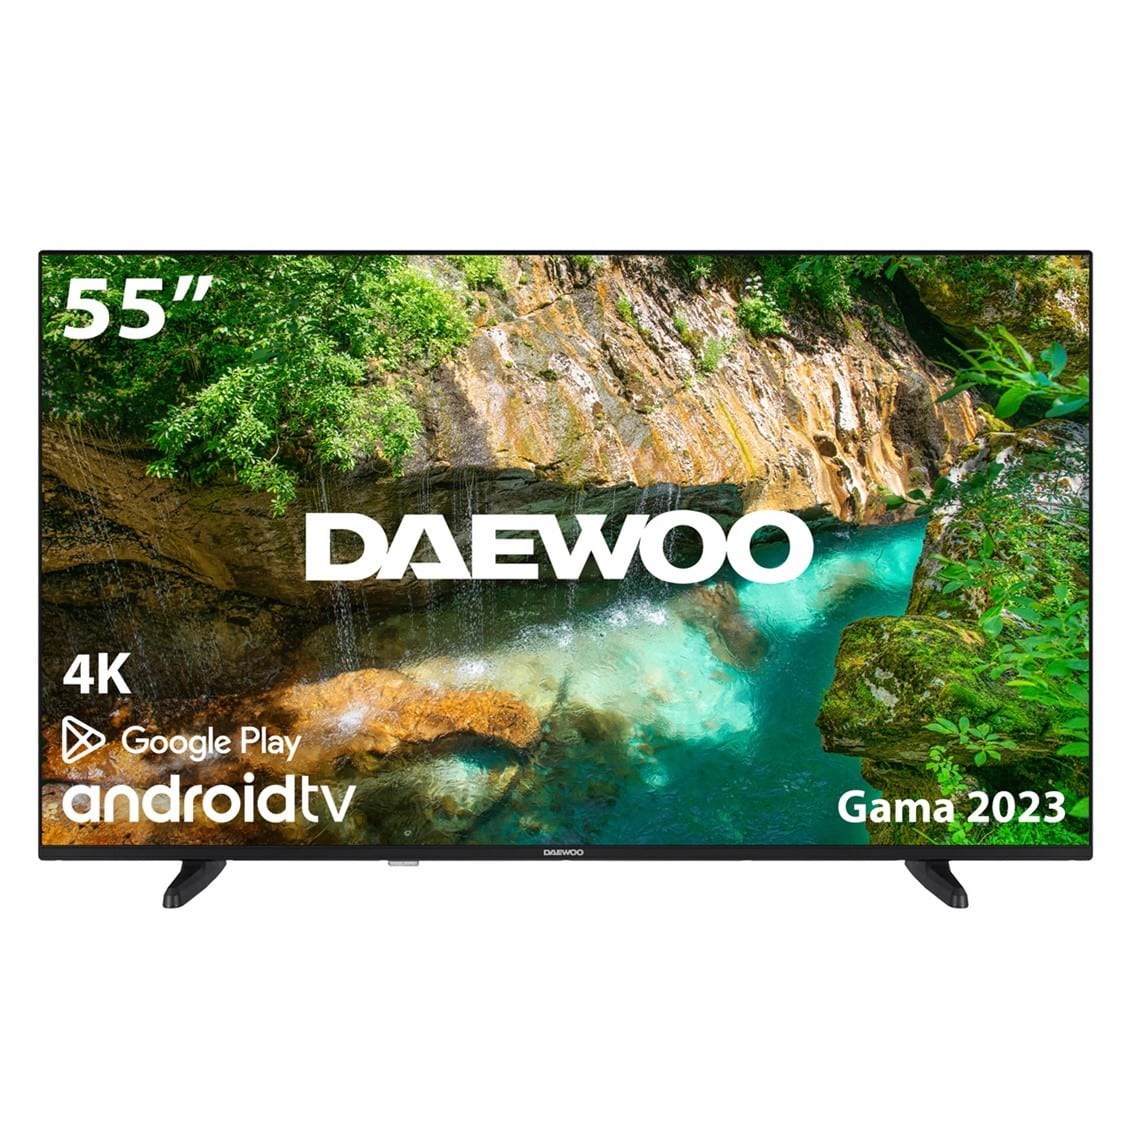 TV DAEWOO 55" LED 4K UHD 55DM62UA ANDROID SMART TV WIFI HDR HLG HDMI USB BLUETOOTH TDT2 SATELITE CABLE DOLBY VISION